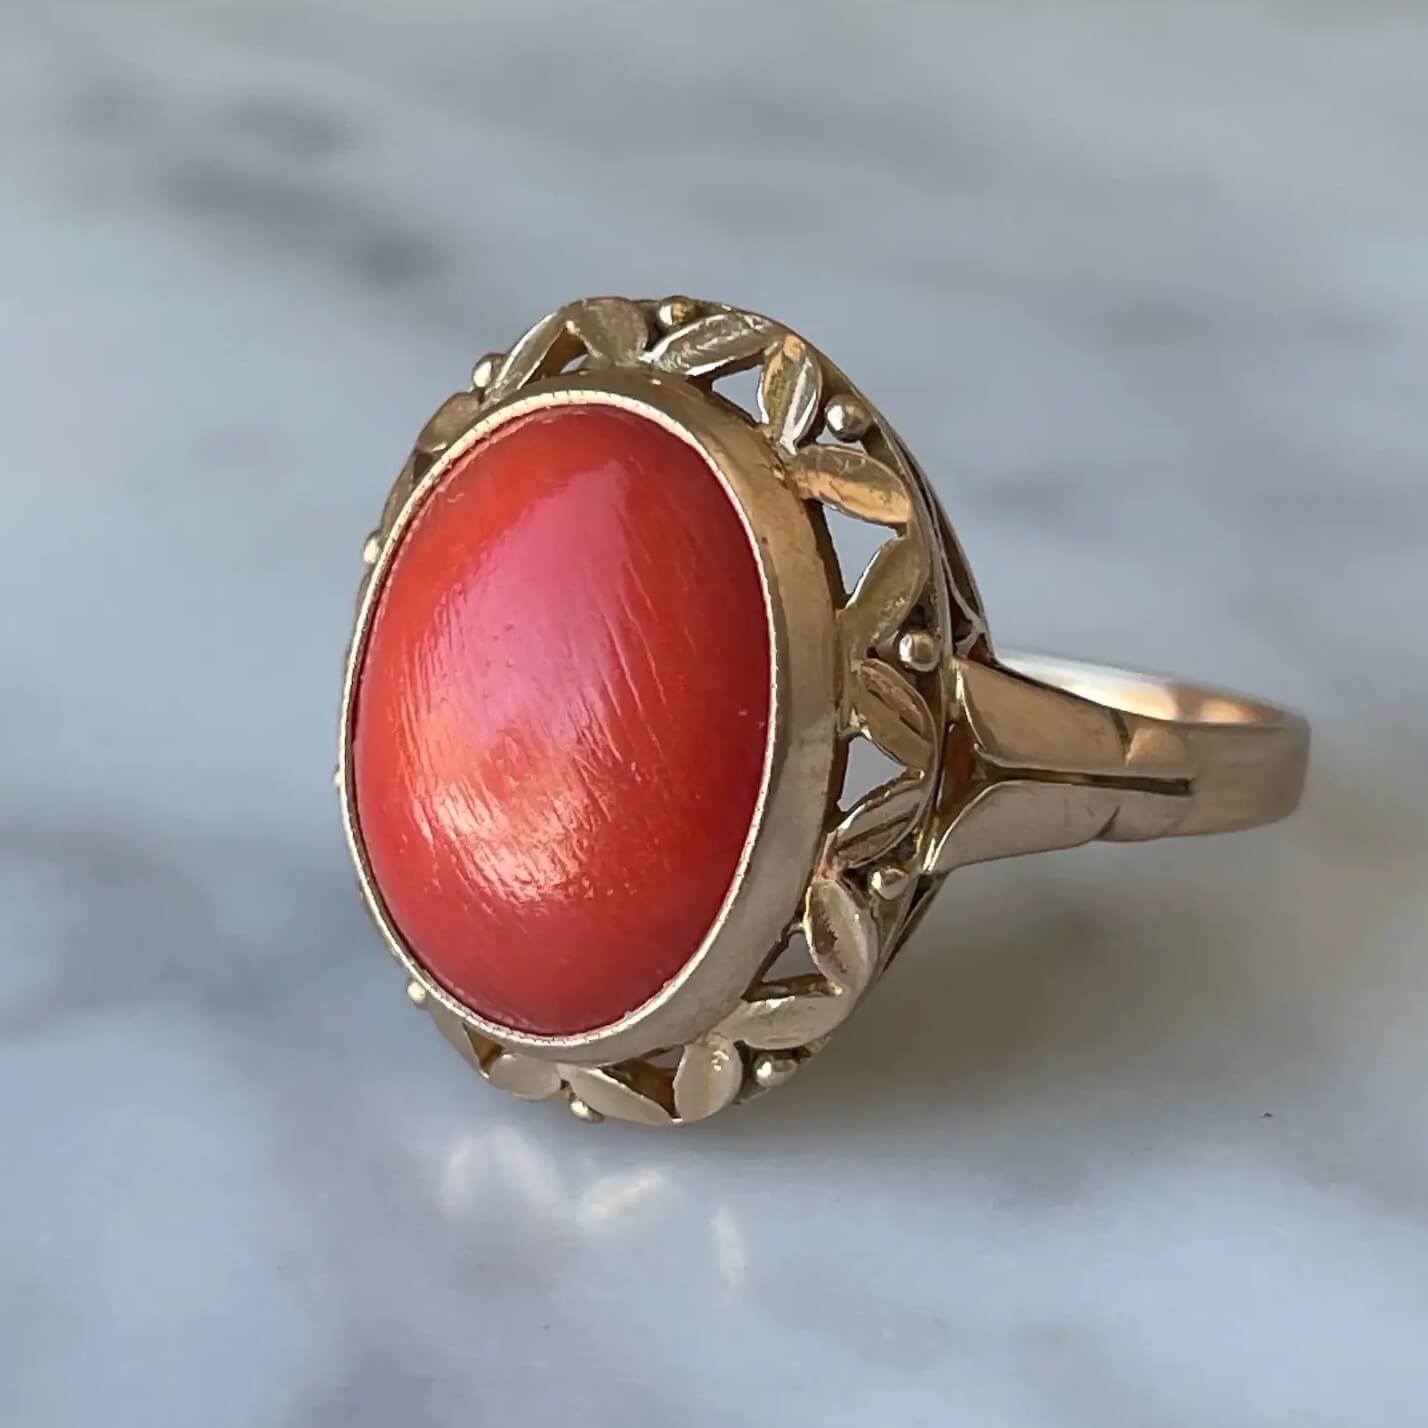 Real Italian Red Coral Stone Ring Original Italian Red Coral Marjan Stone  Ring | eBay